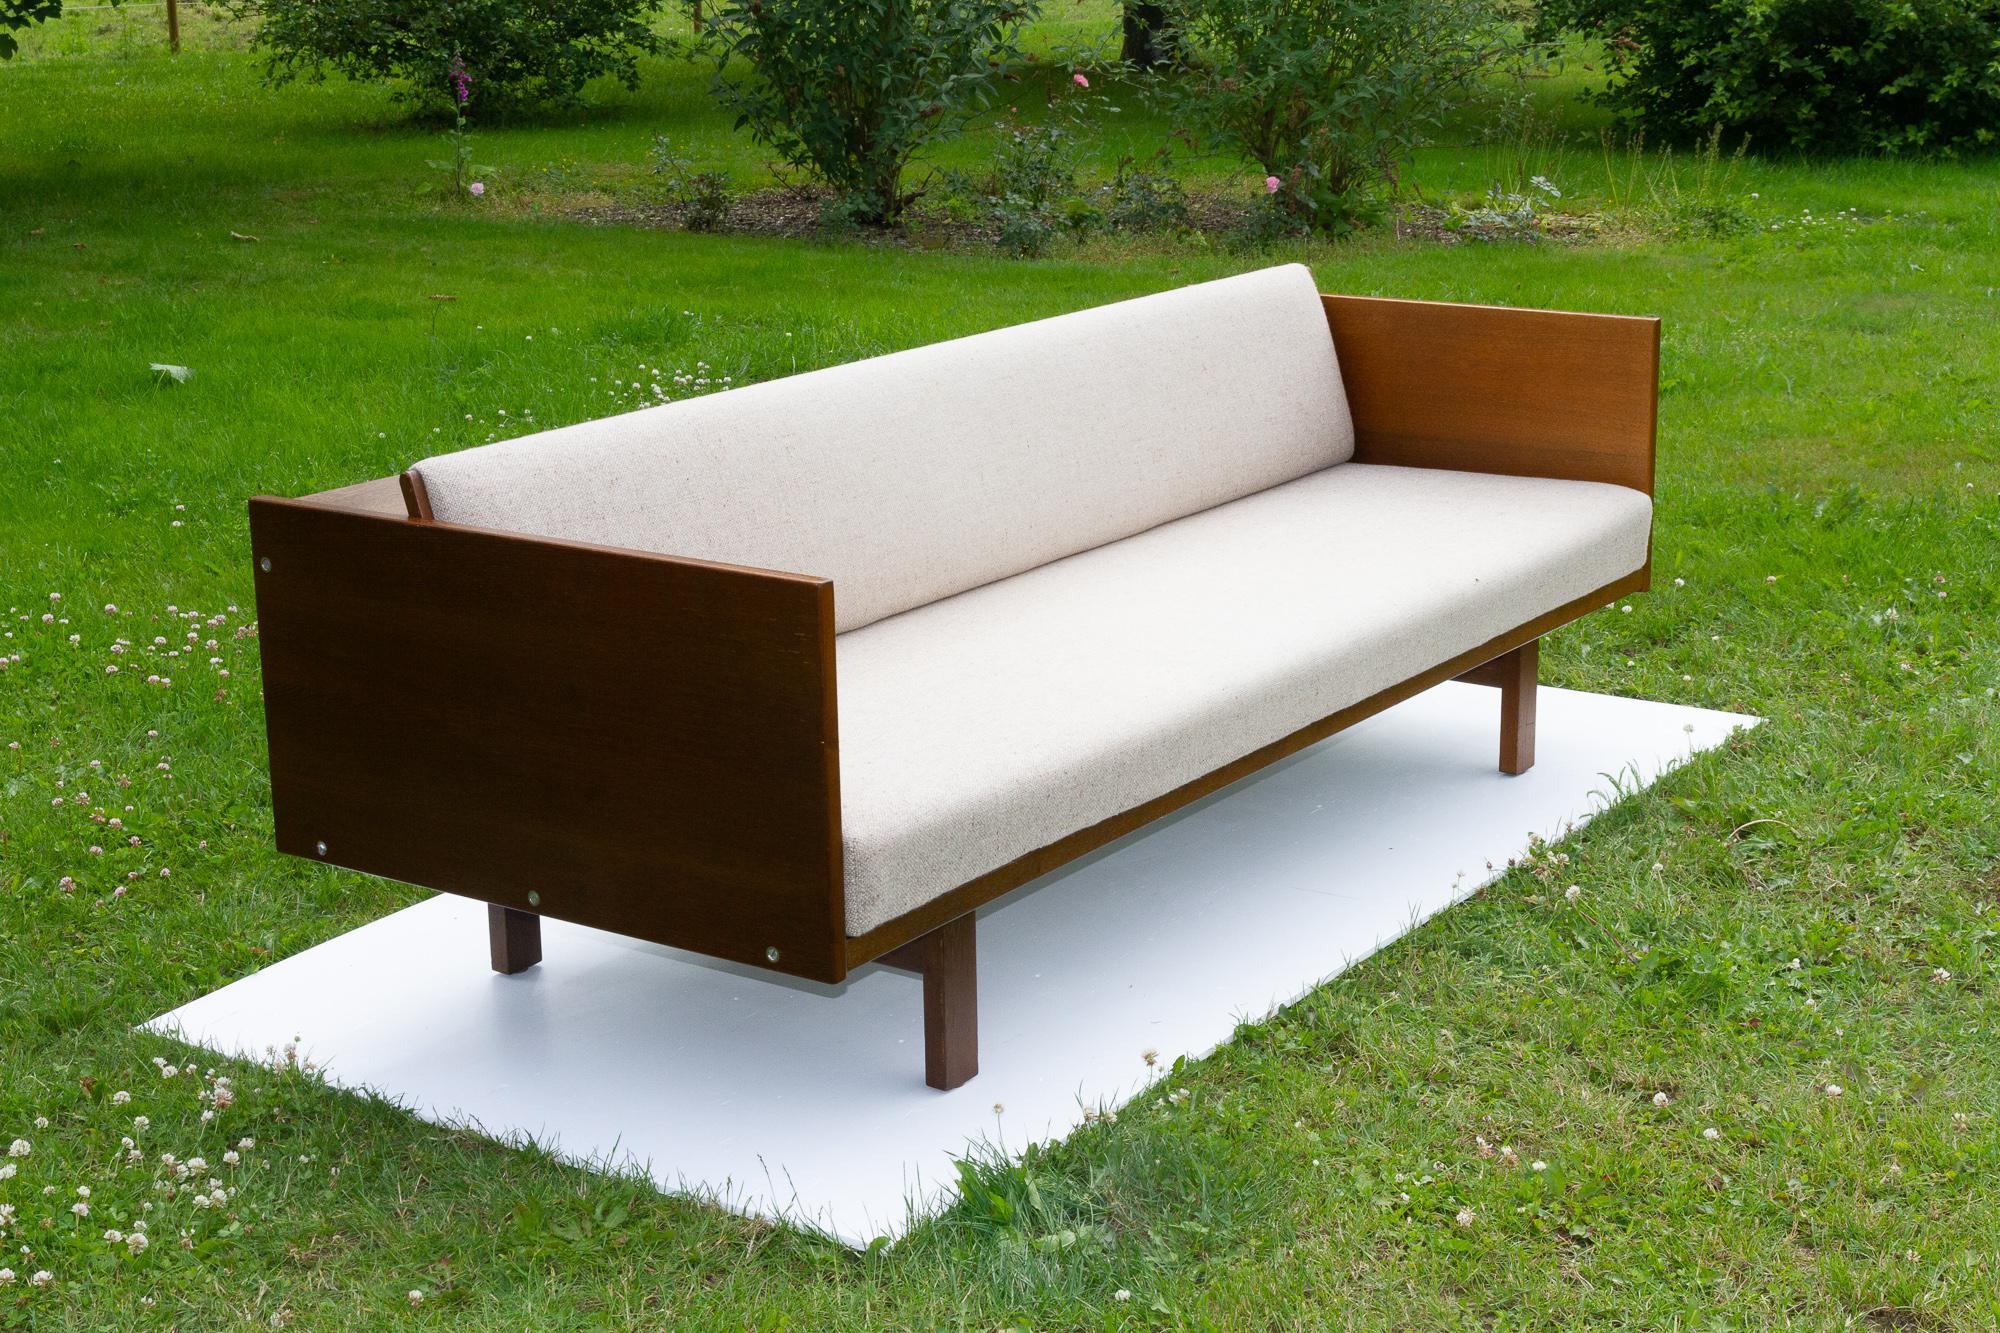 Vintage Danish Oak daybed GE 259 by Hans J. Wegner for Getama, 1970s.
Danish modern design icon GE-259 convertible sofa by renowned Danish designer Hans J. Wegner. Elegant and practical design in this sofa that converts into a bed. Backrest with